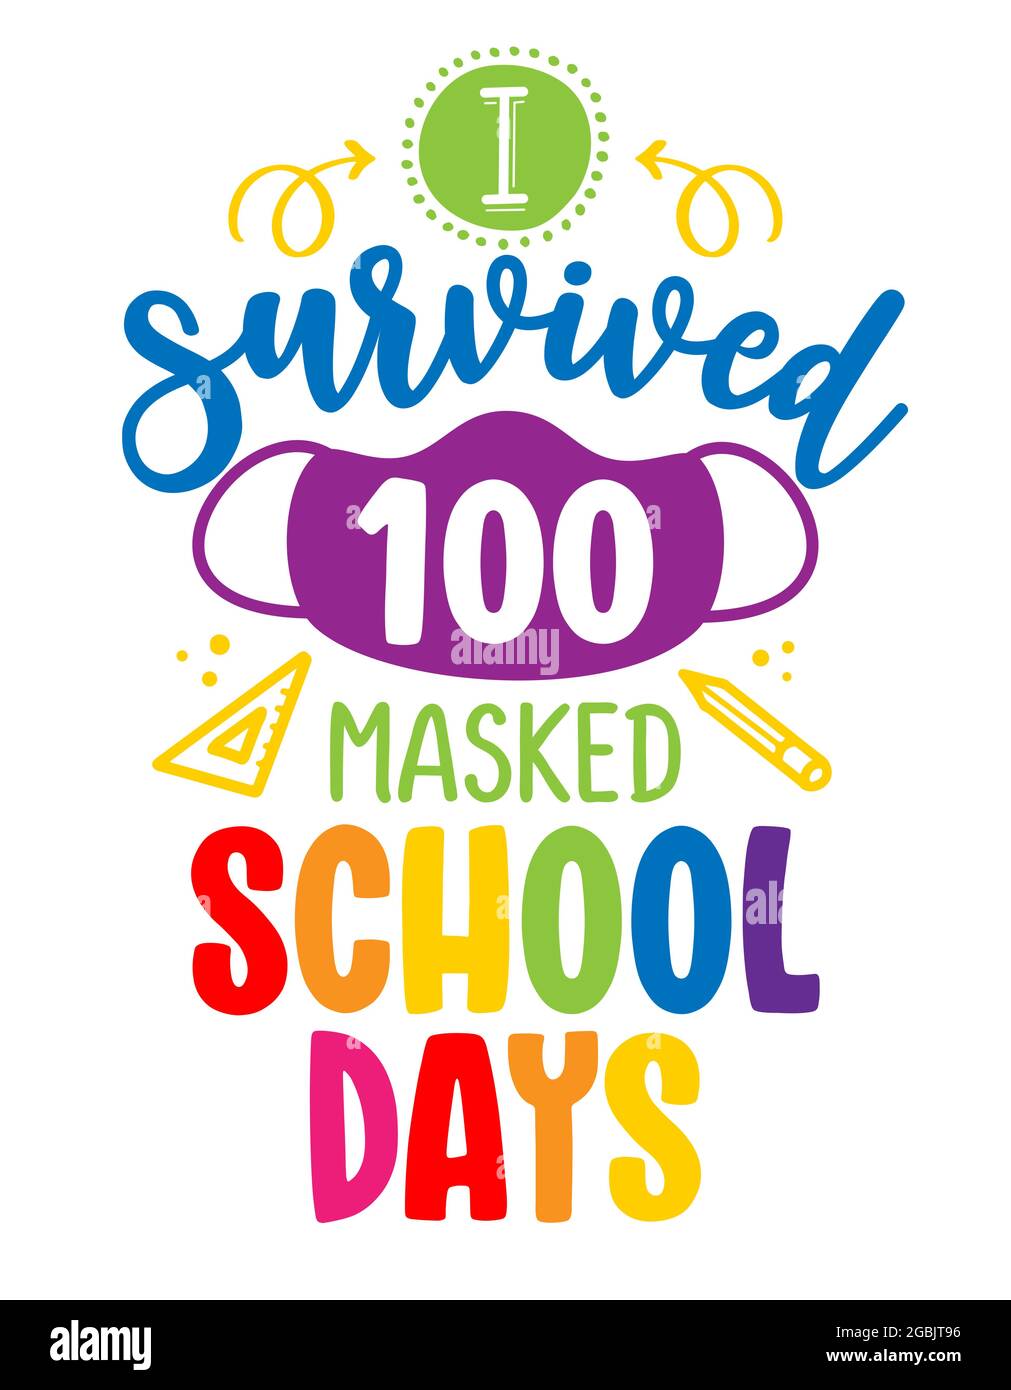 I survived 100 masked school days - Online school e-learning poster with text for self quarantine. Hand letter script motivation sign catch word art d Stock Vector